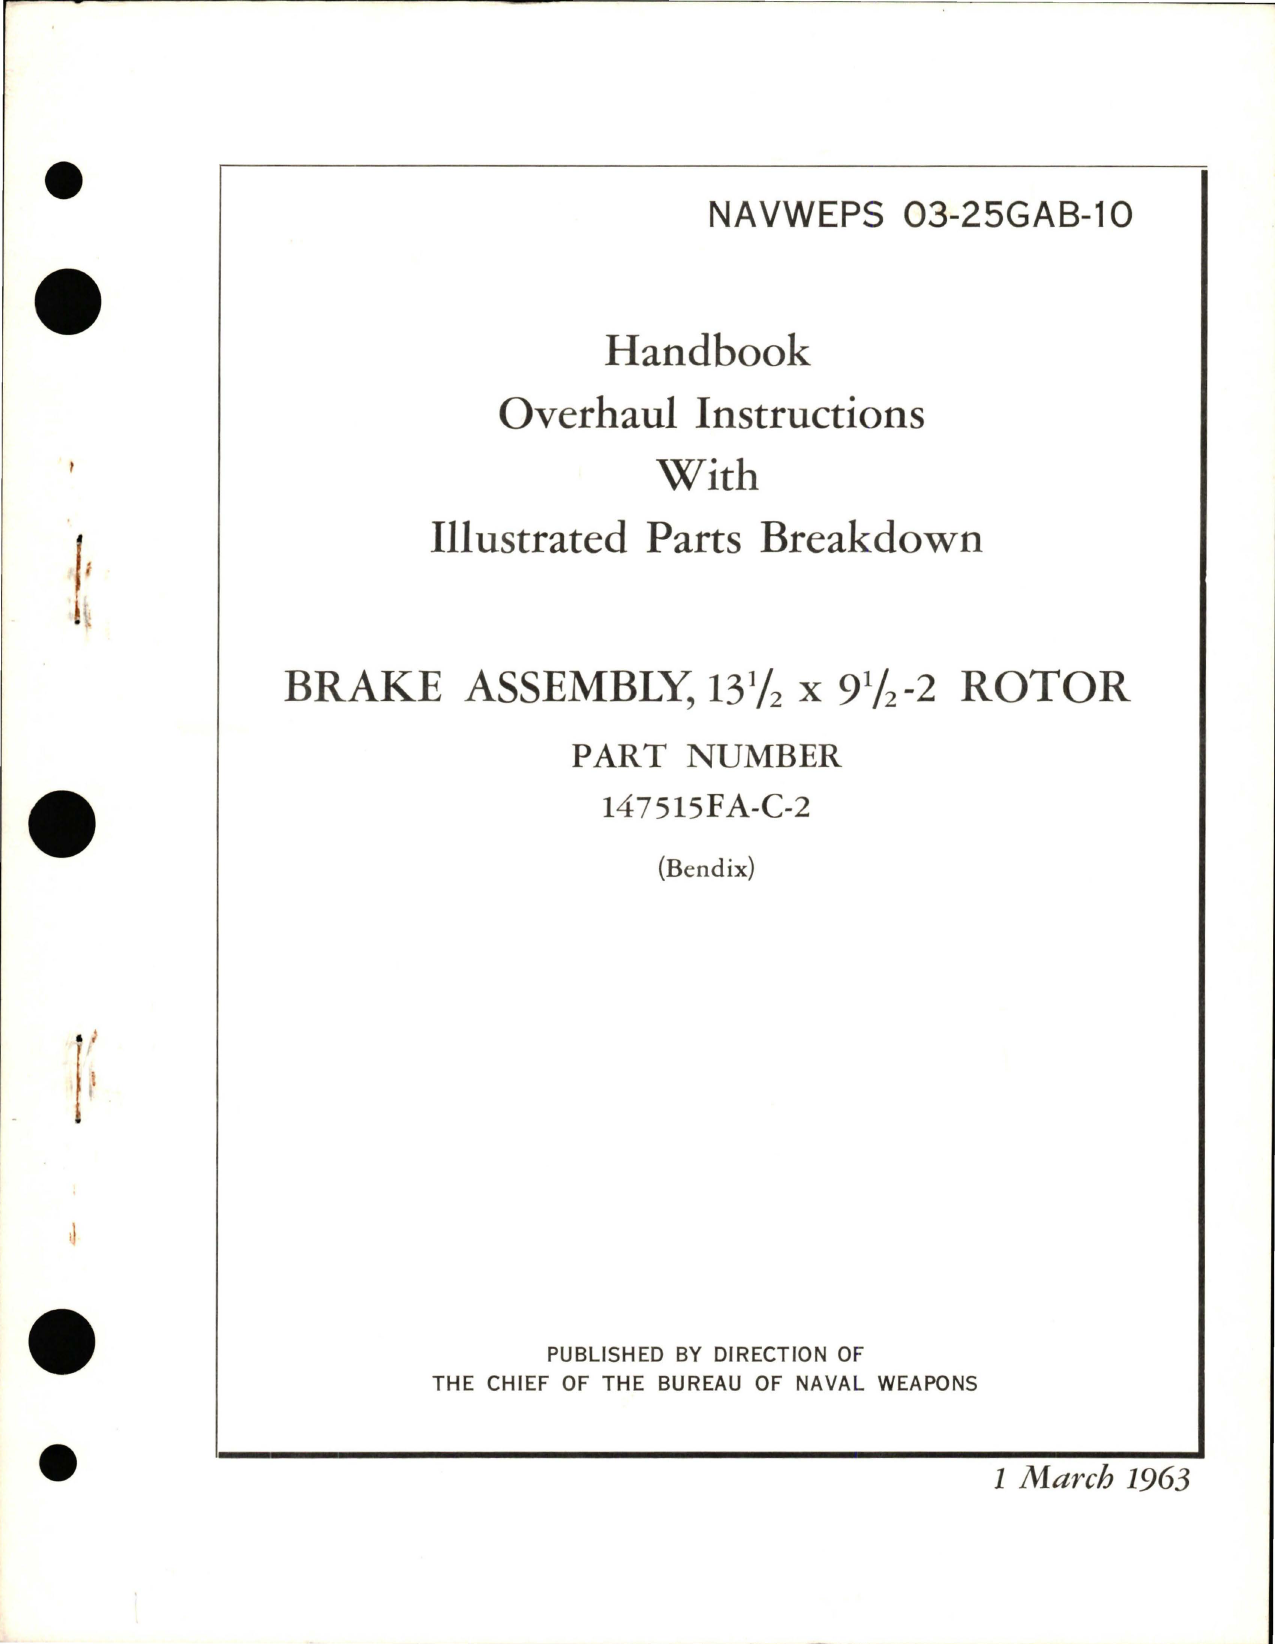 Sample page 1 from AirCorps Library document: Overhaul Instructions with Illustrated Parts for 13 1/2 x 9 1/2 -2 Rotor Brake Assembly - Part 147515FA-C-2